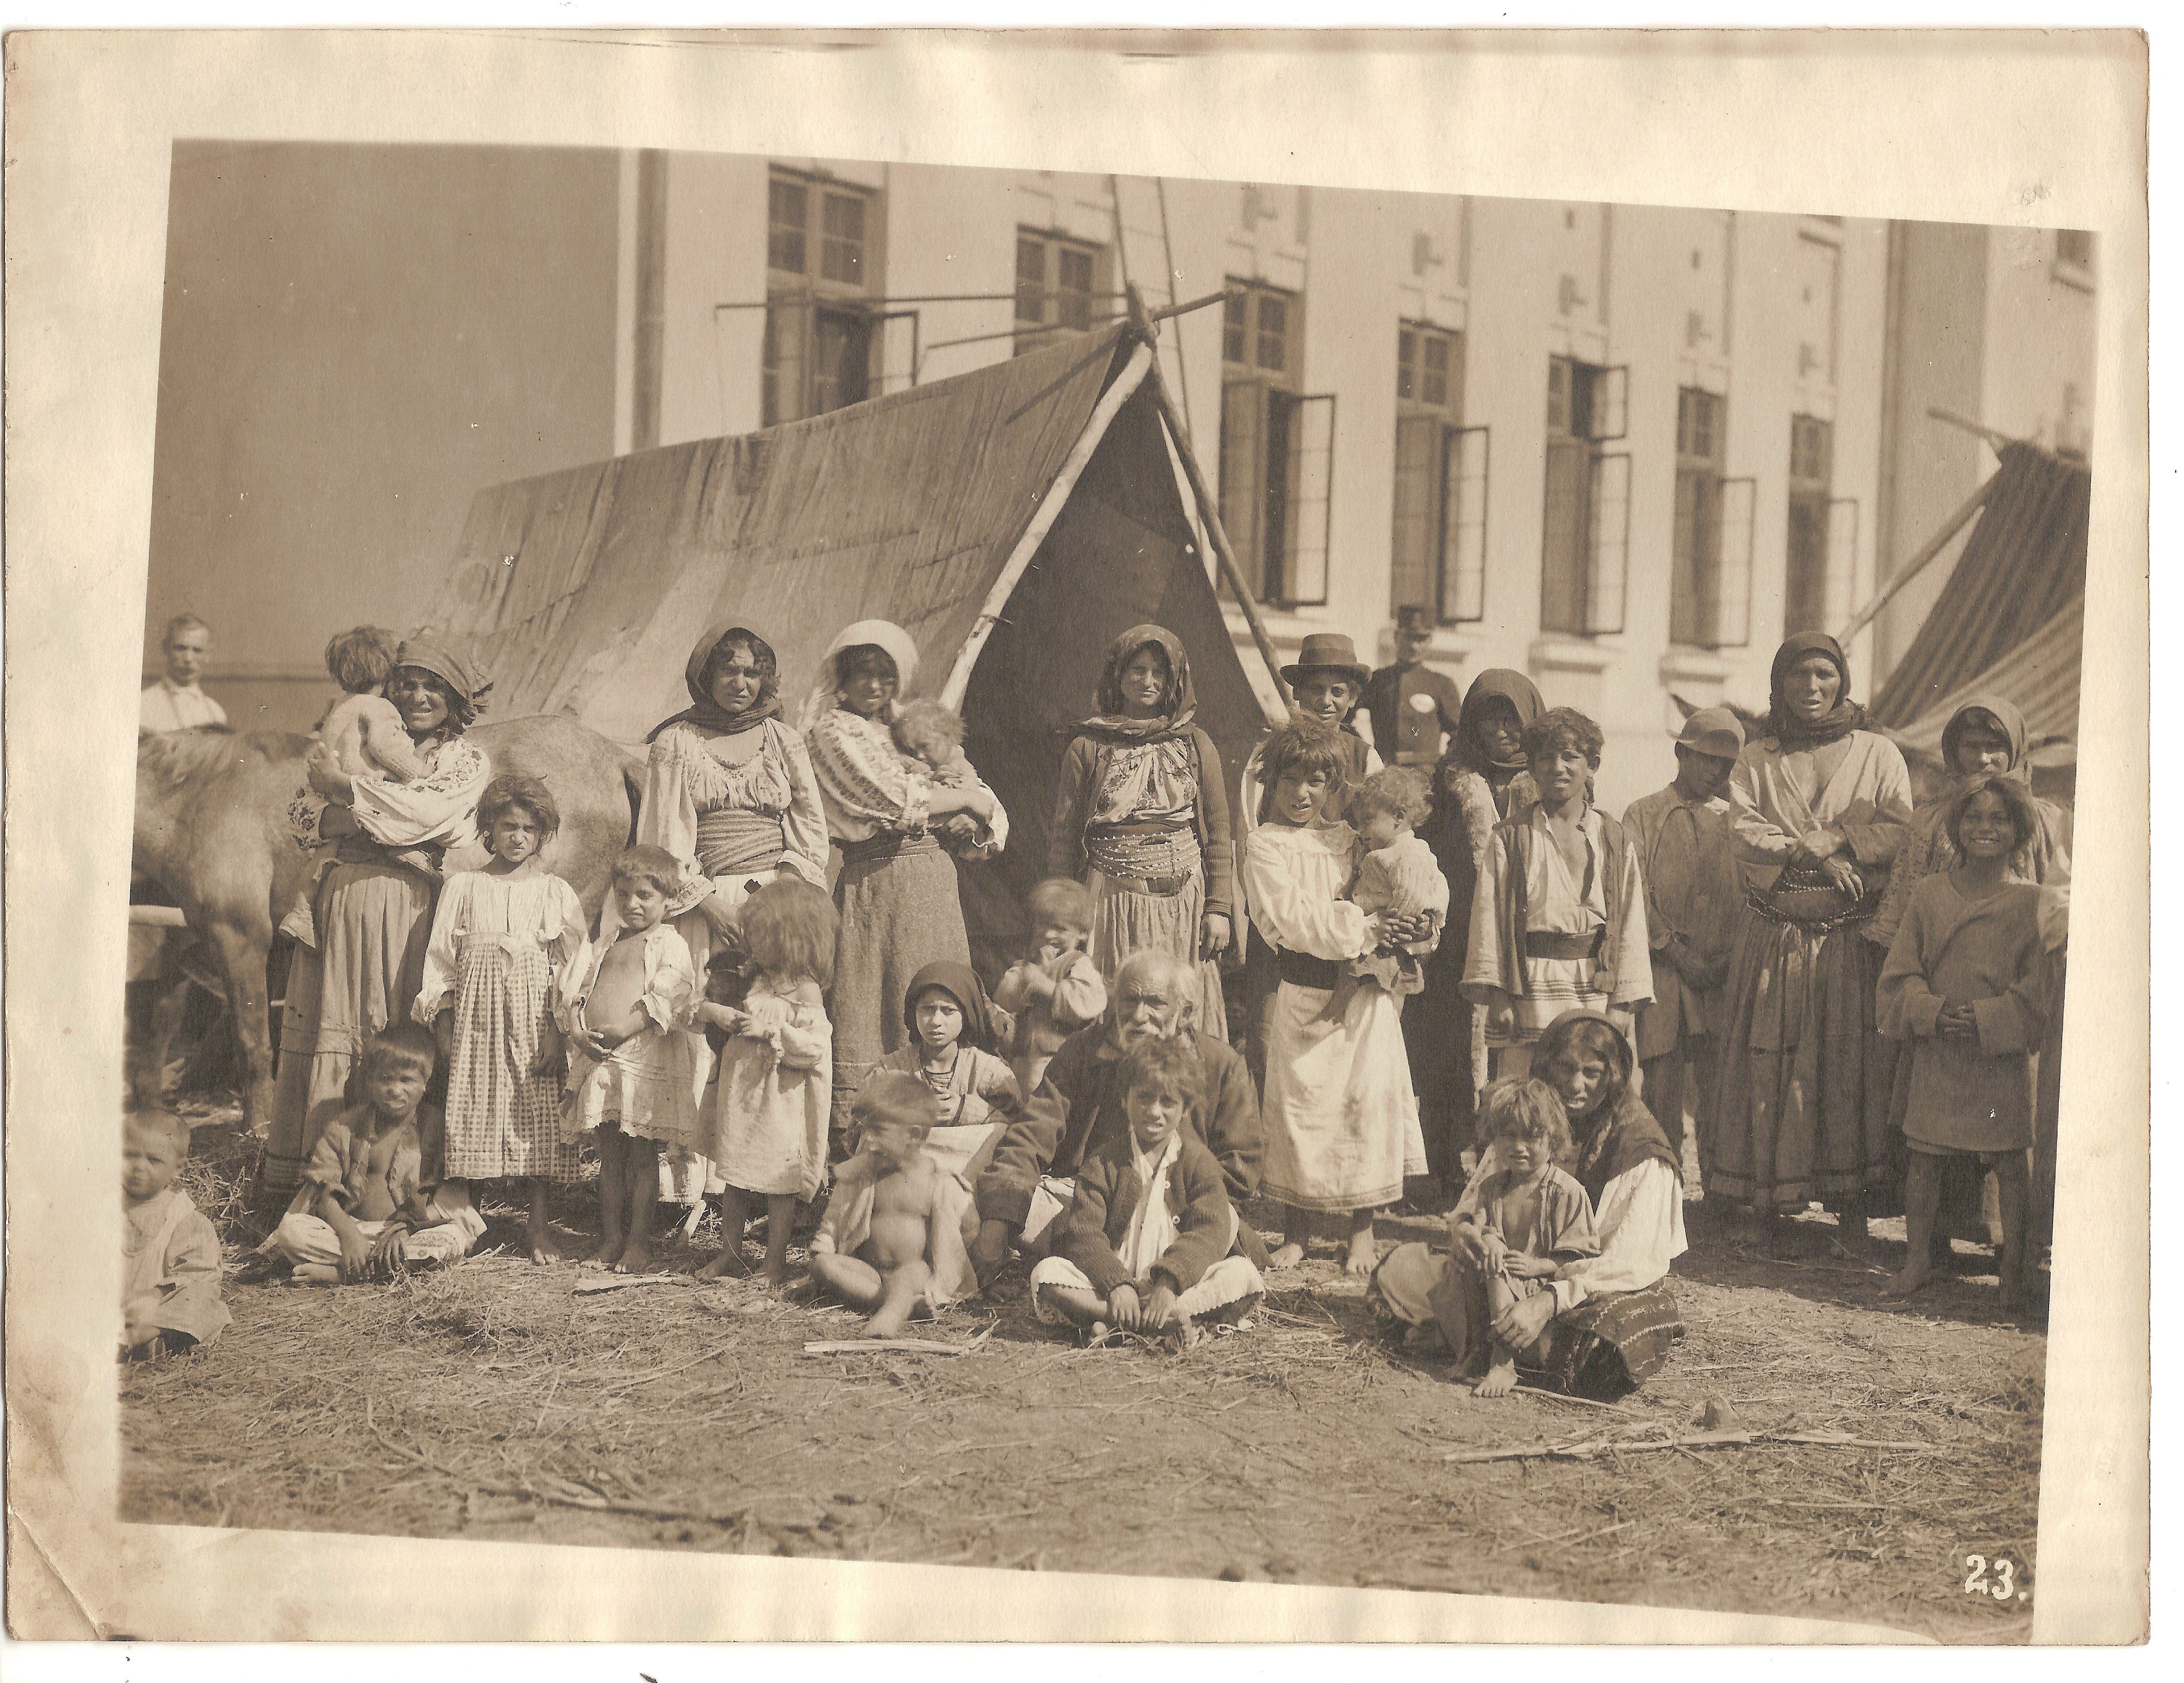 The National Archives, Romania, Large group of nomad Roma people (men, women - some wearing traditional blouse, and children) in front of a tent, ref. RO-BV-FD-00330-4-2-06 